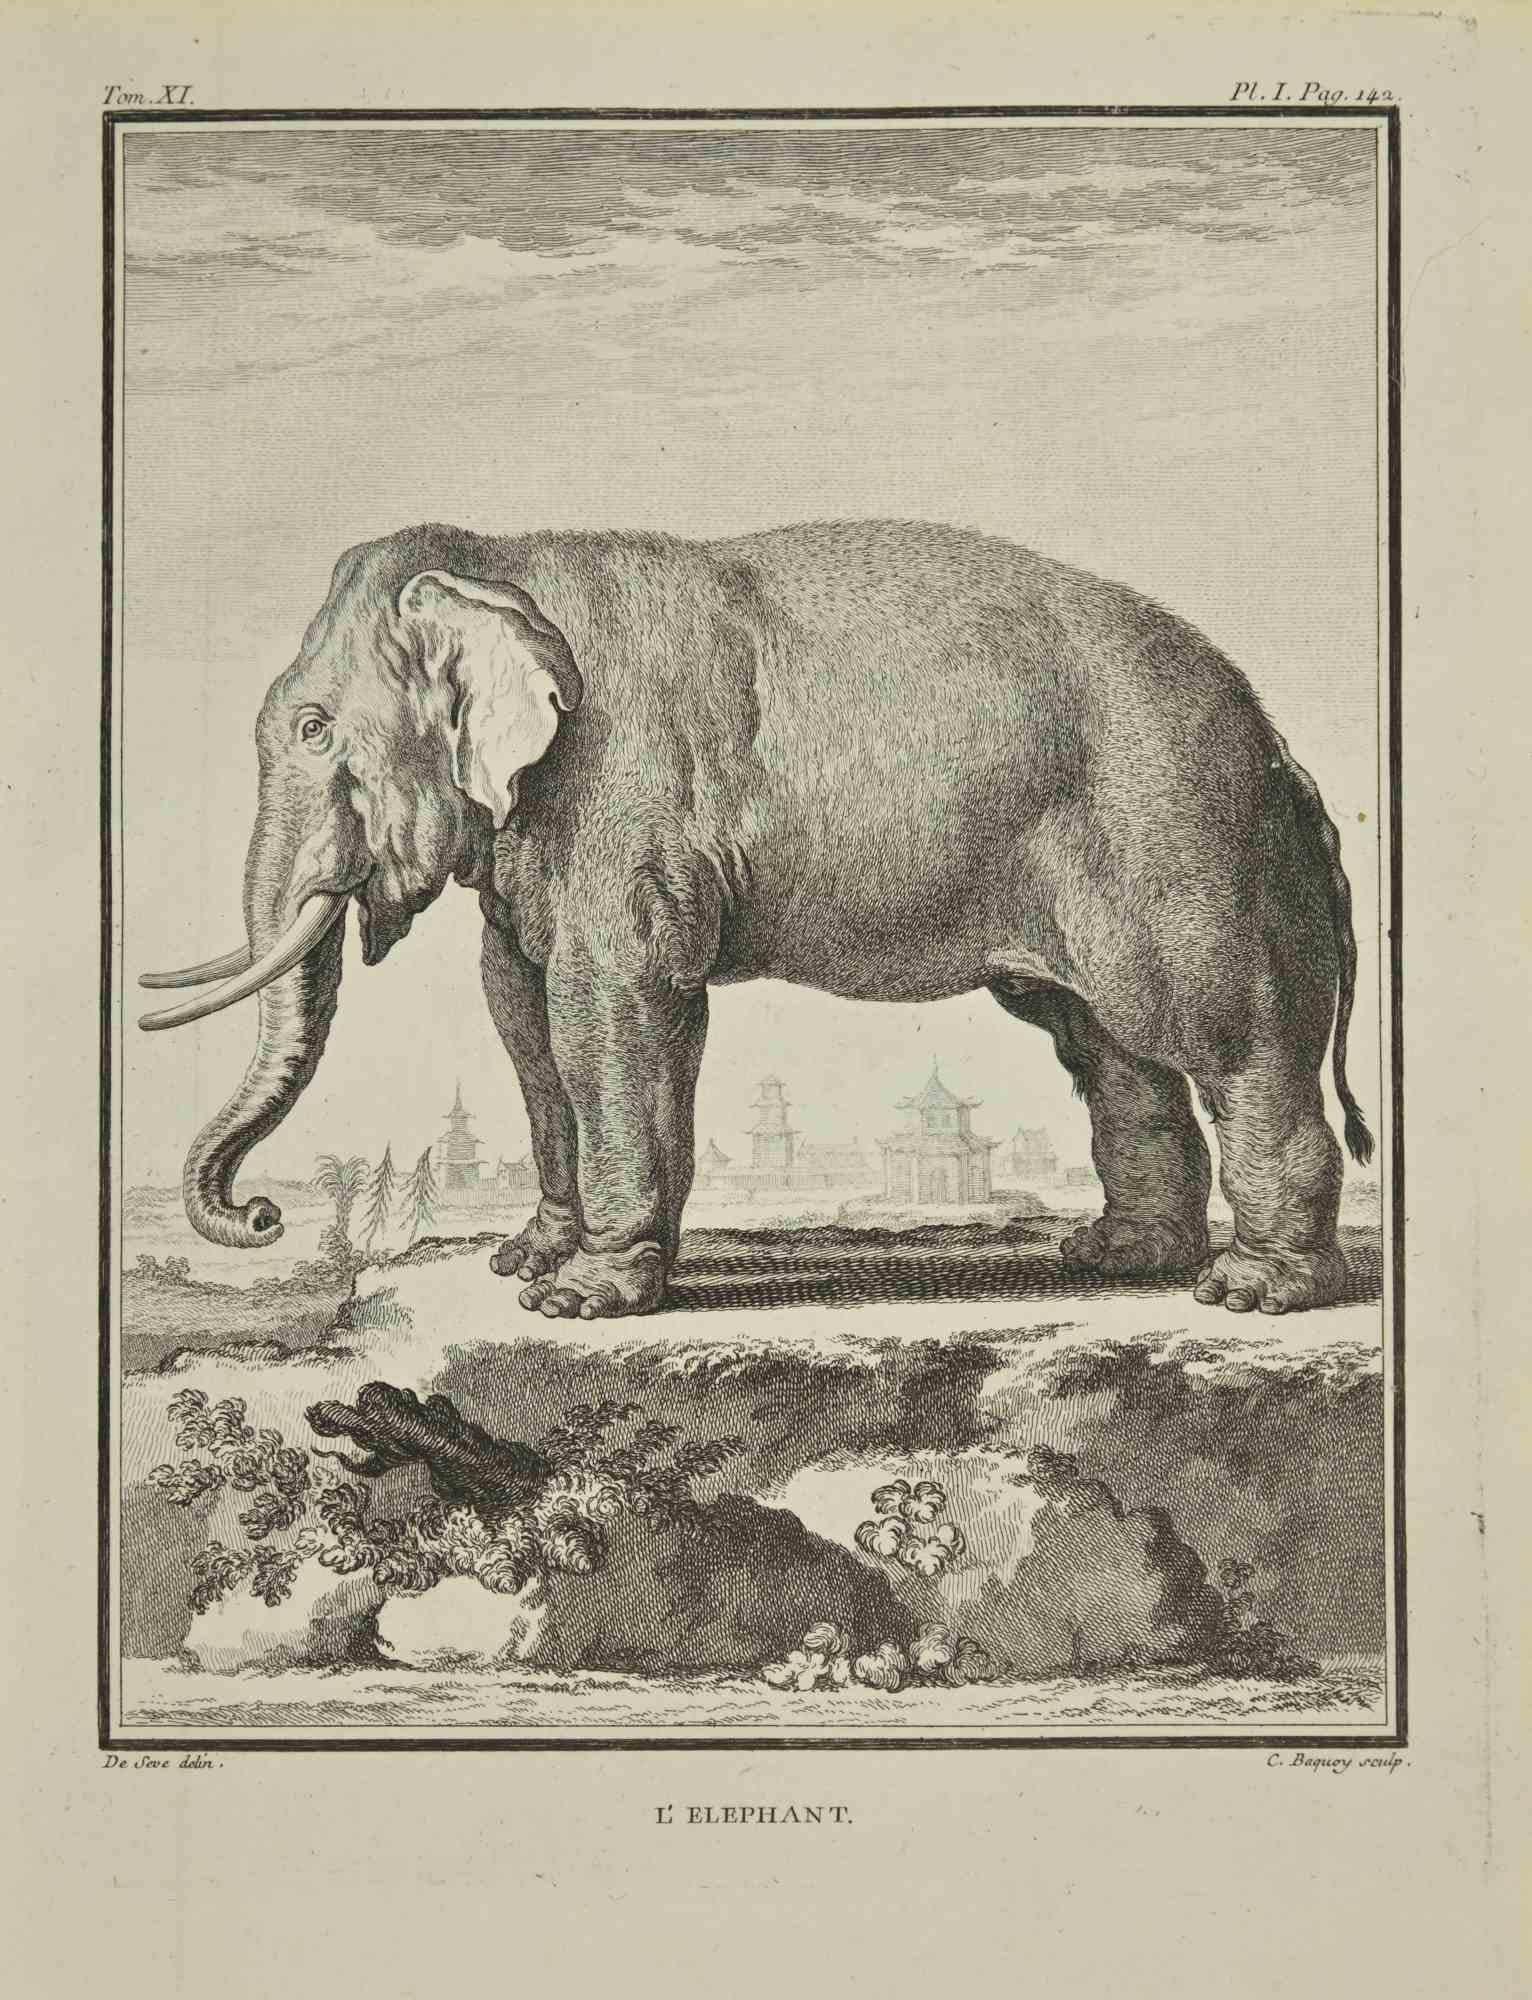 L'elephant is an etching realized by Jean Charles Baquoy in 1771.

It belongs to the suite "Histoire Naturelle de Buffon".

The Artist's signature is engraved lower right.

Good conditions.